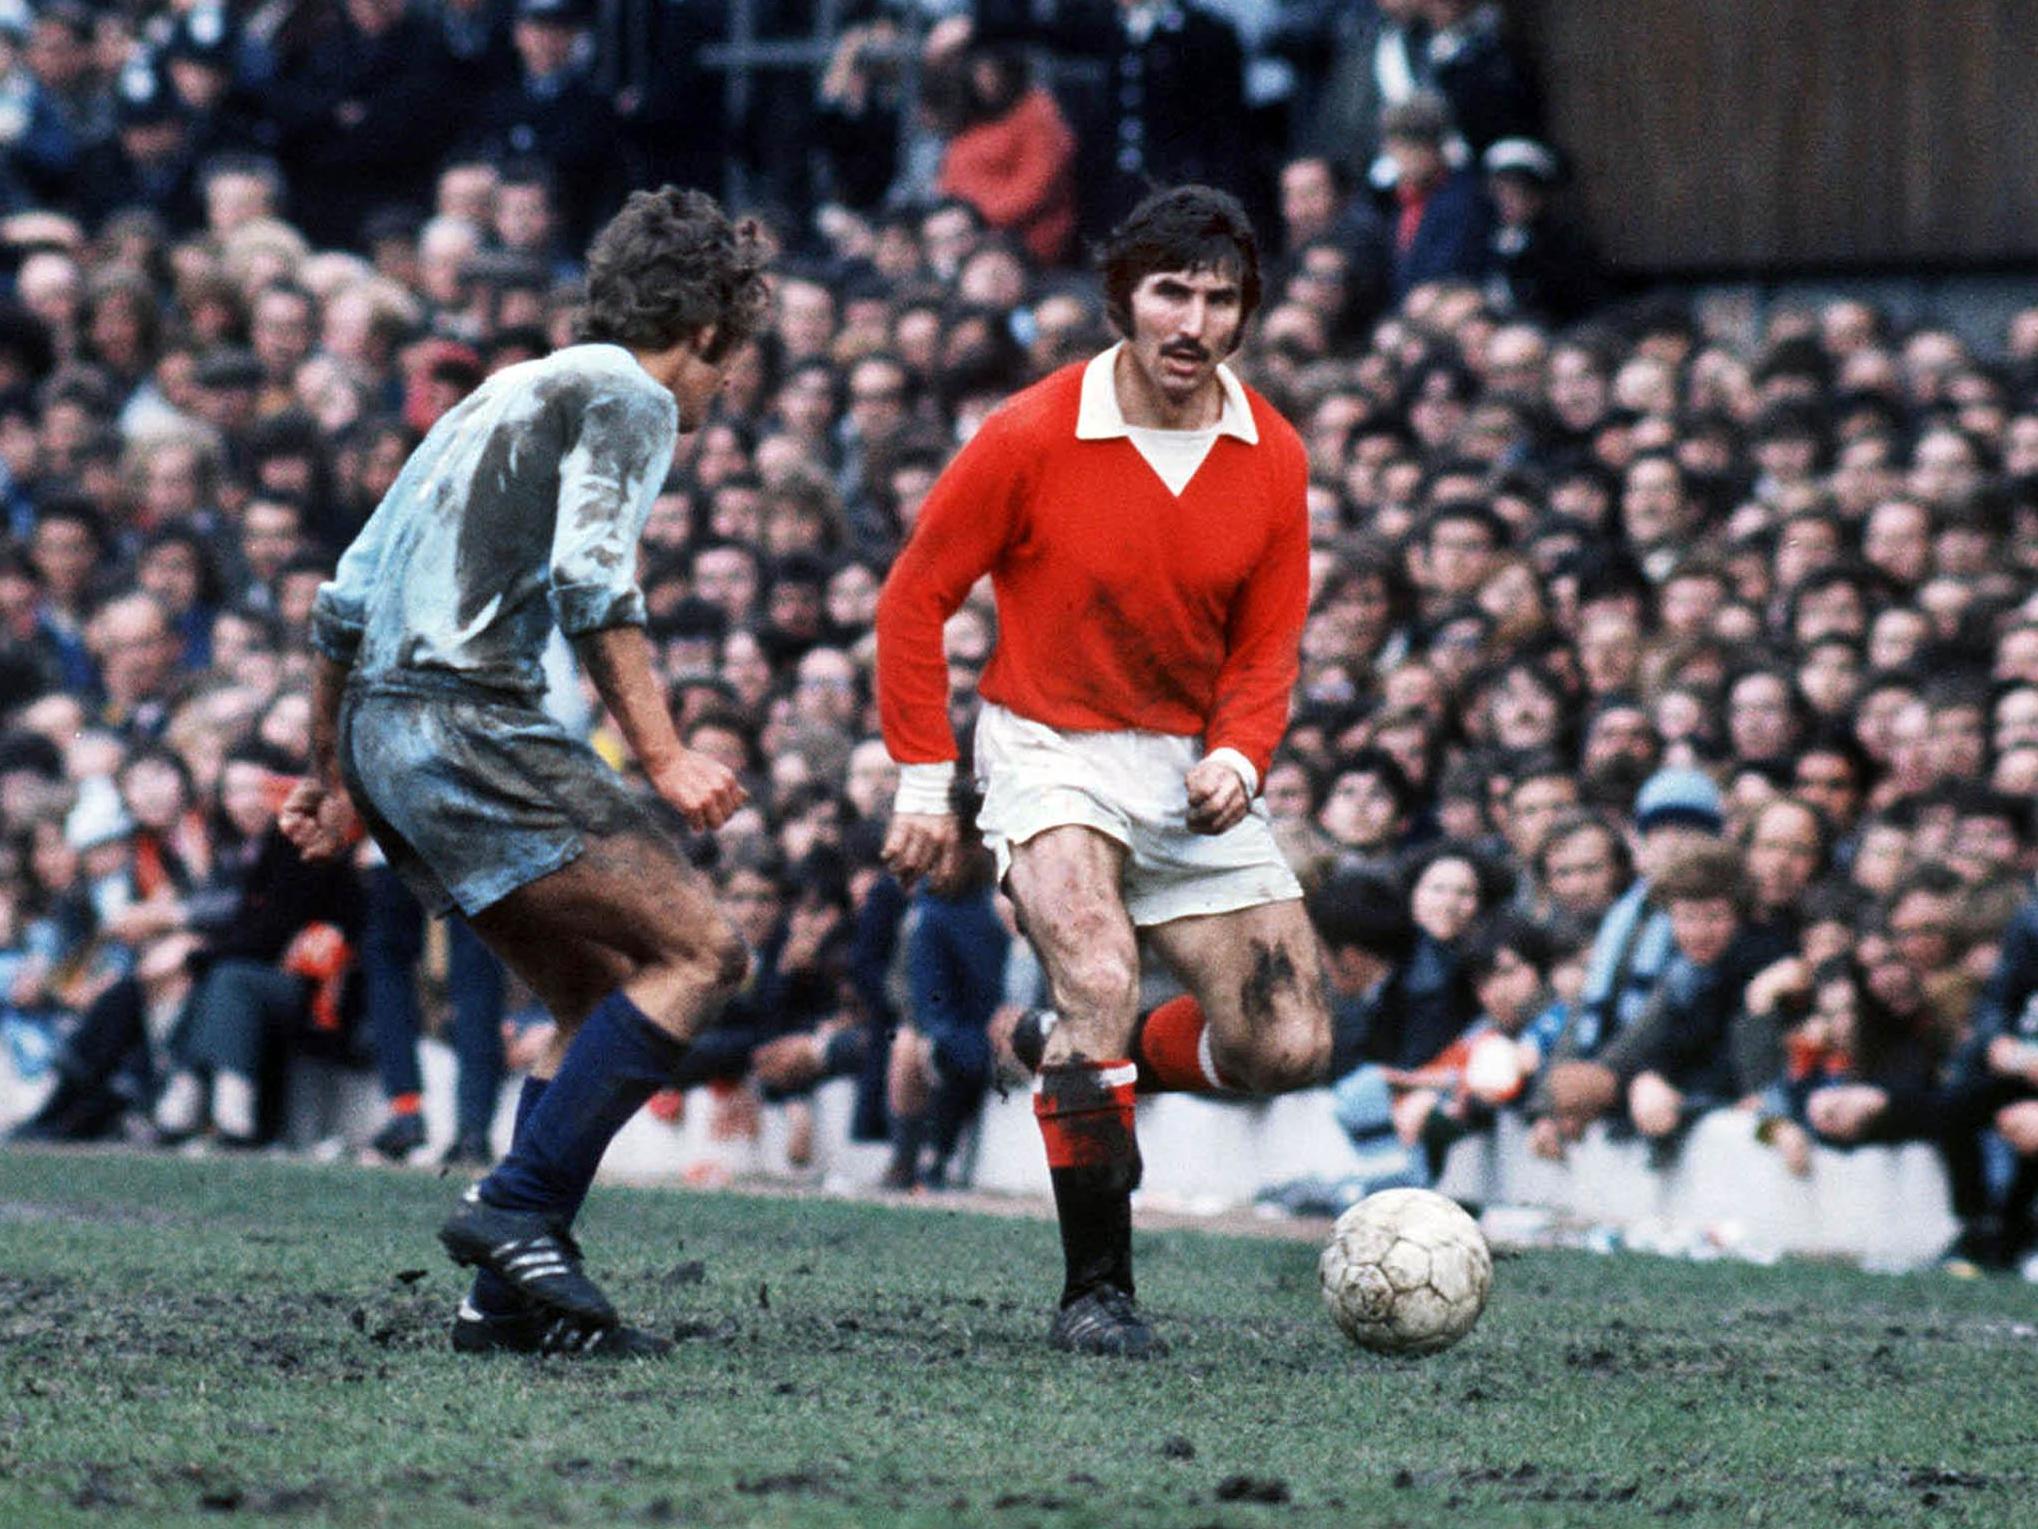 The native Dubliner taking on Coventry City in the 1971-72 season